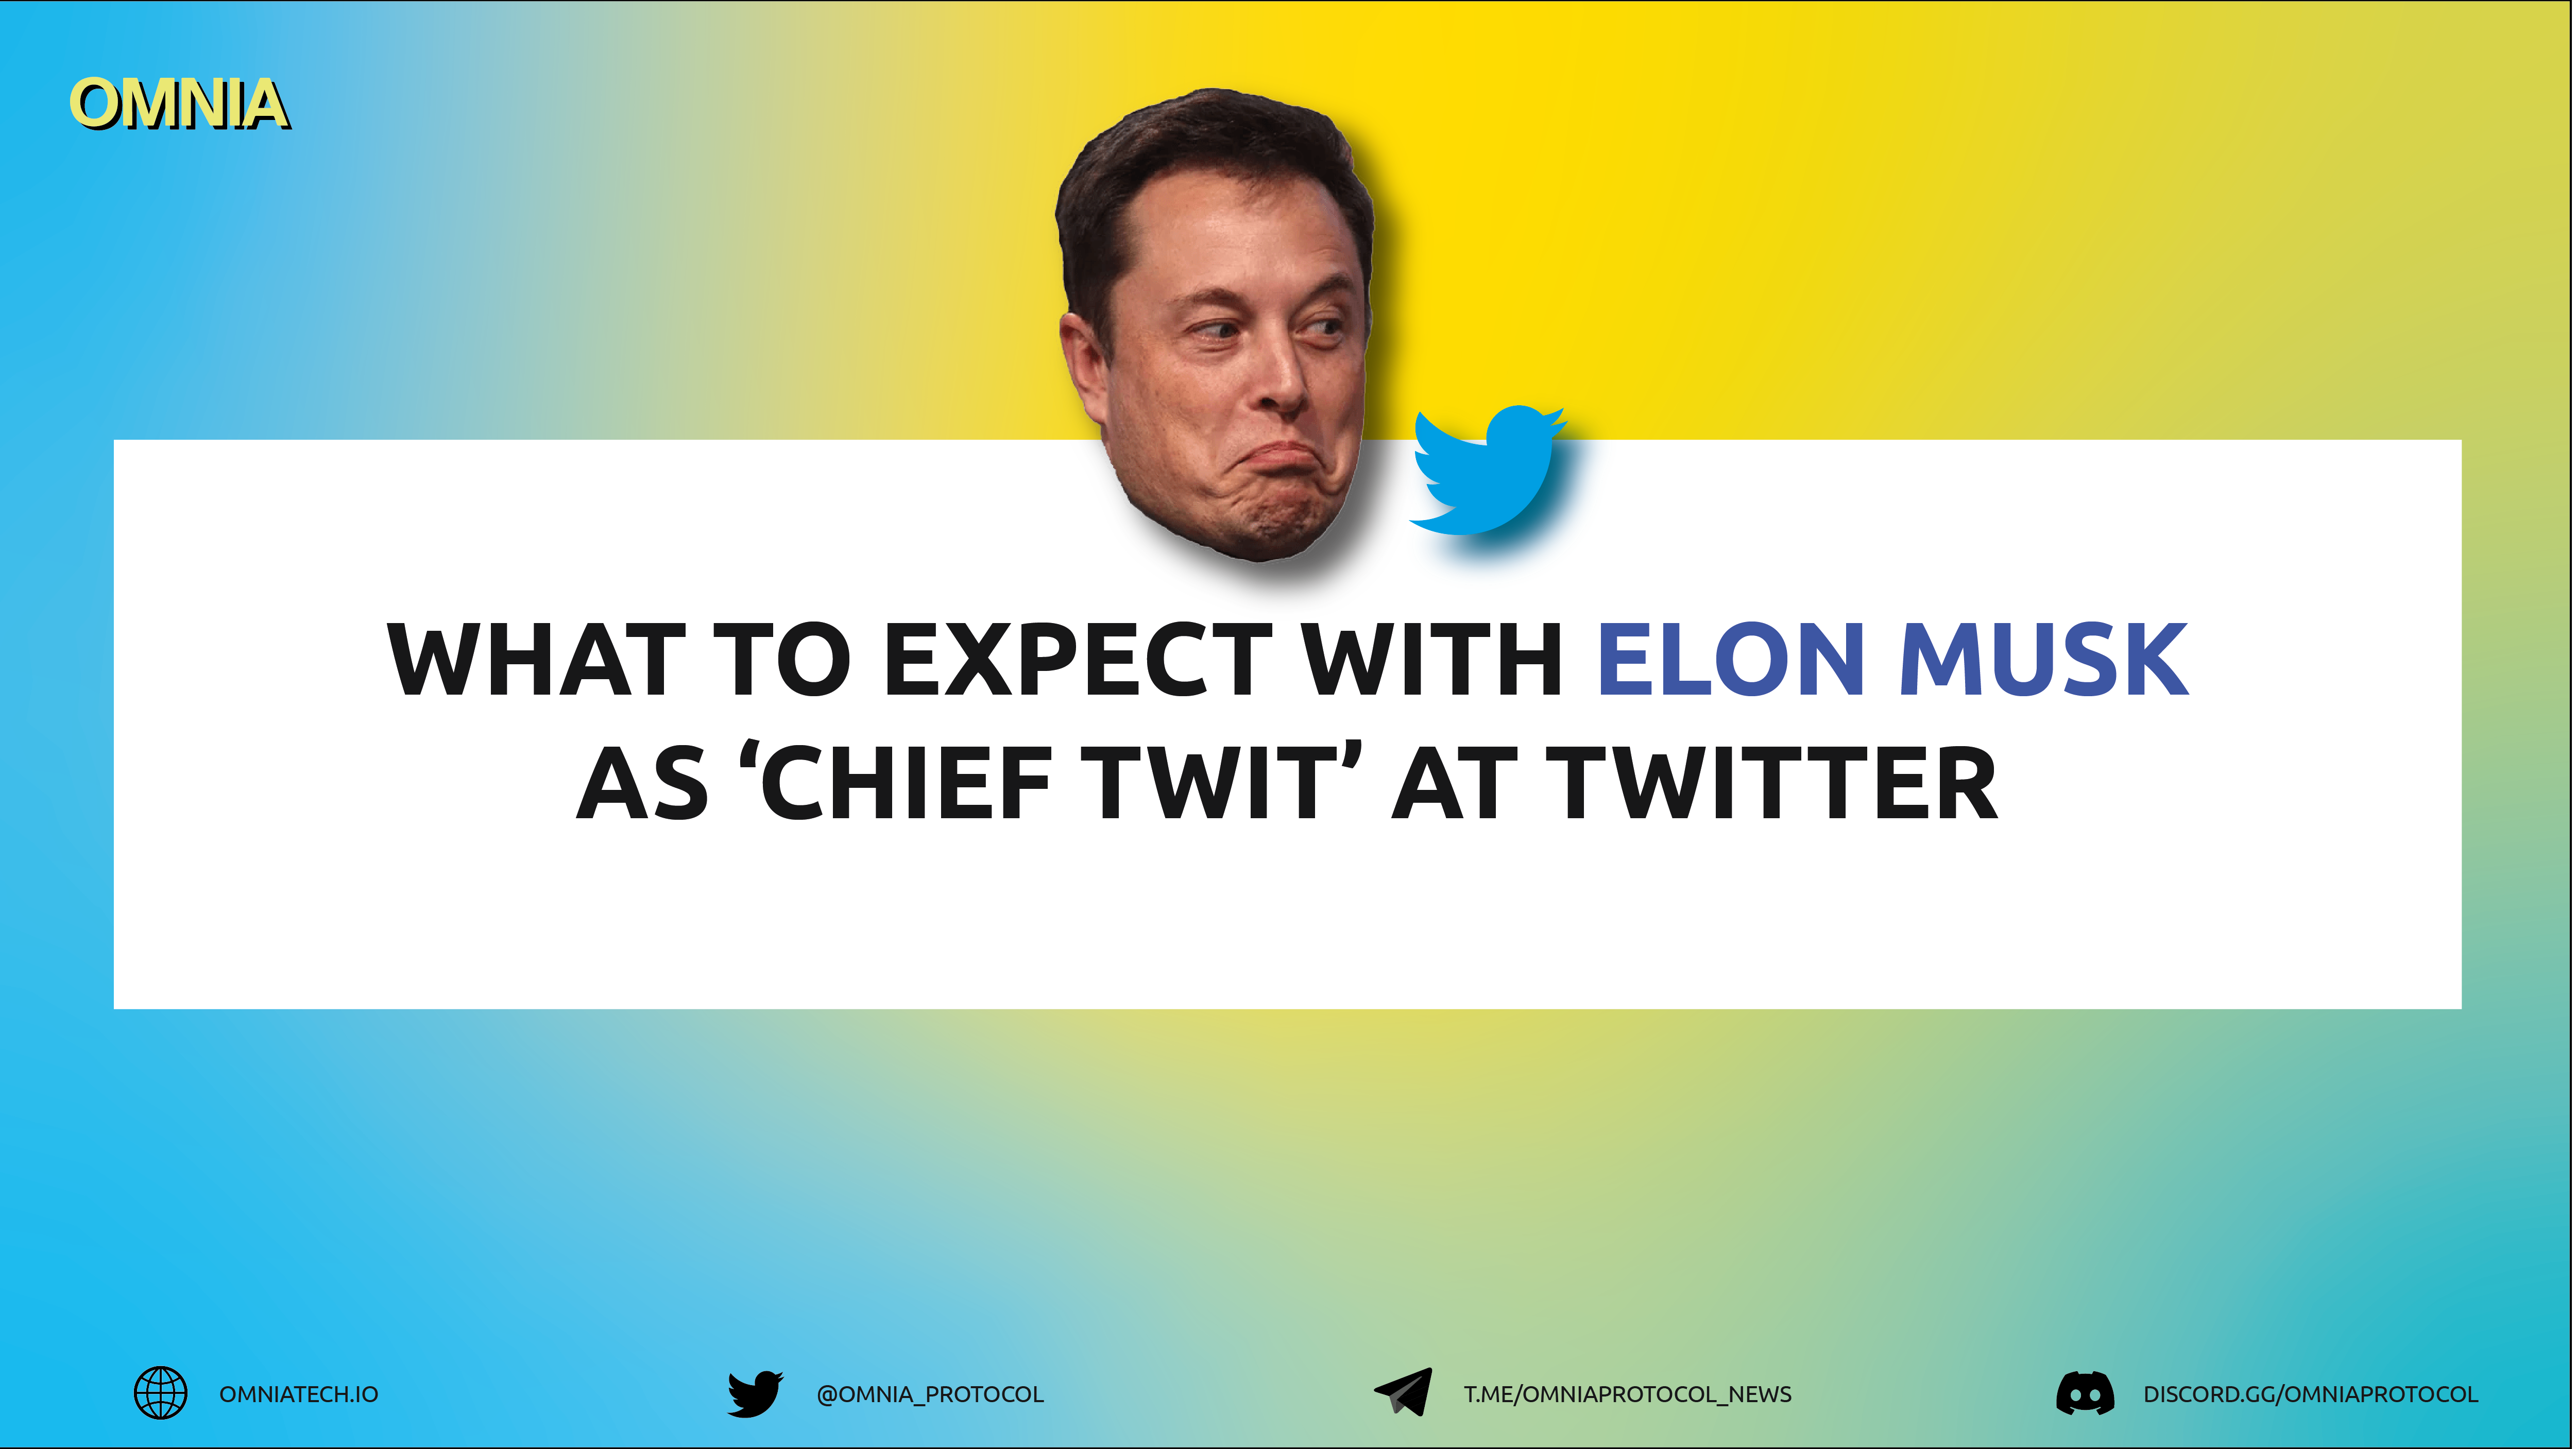 What to Expect With Elon Musk as ‘Chief Twit’ at Twitter